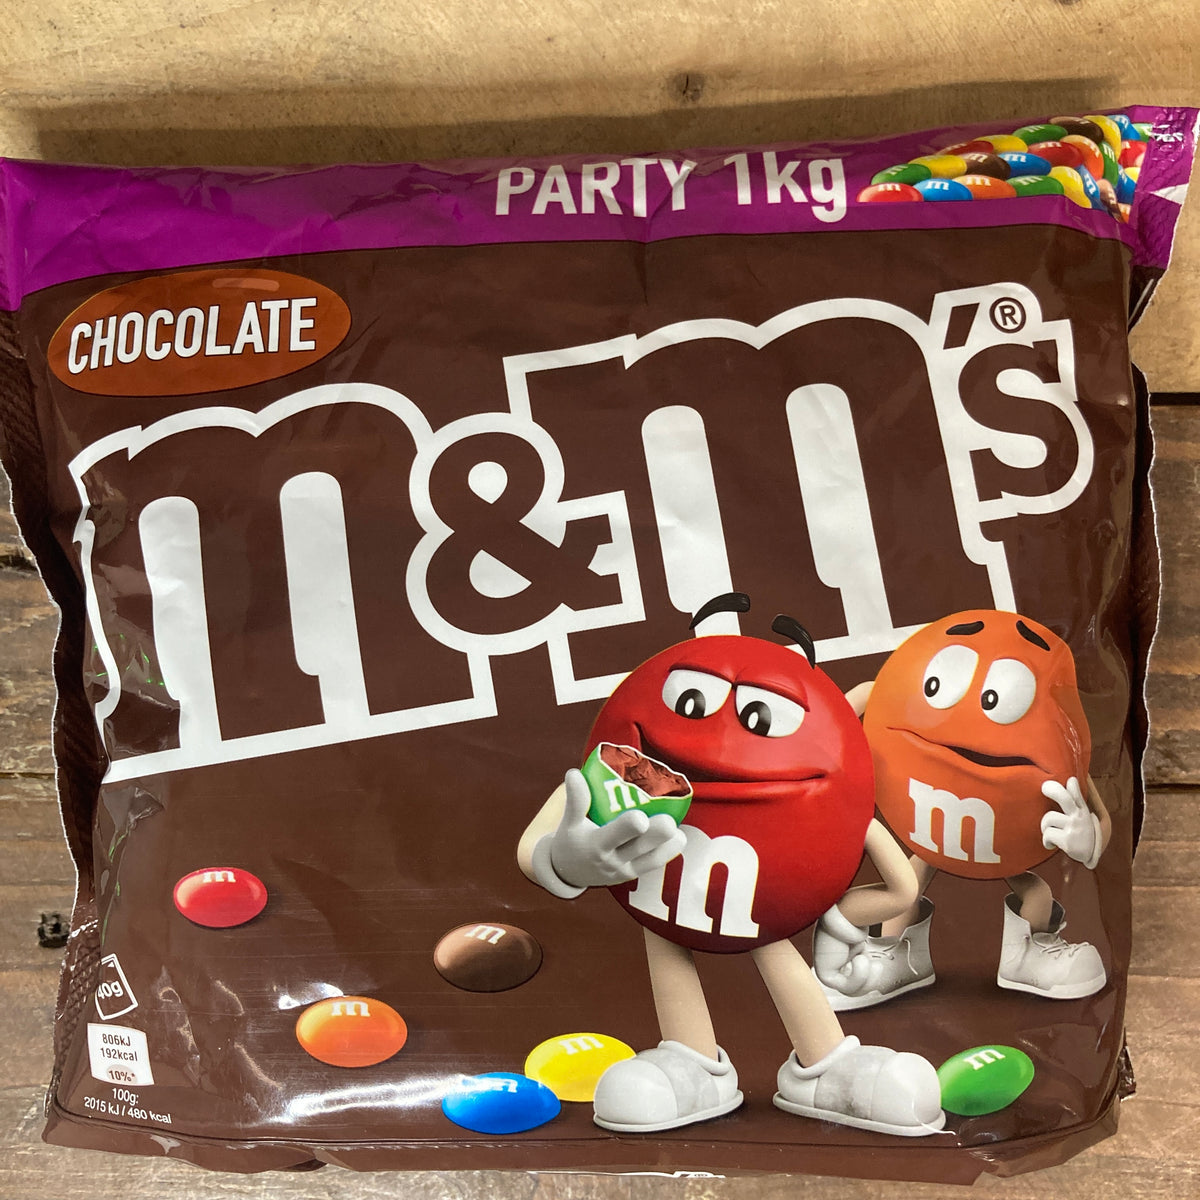 https://www.shoplowpricefoods.shop/wp-content/uploads/1692/11/find-the-most-attractive-deals-purchase-our-1-kg-of-mms-milk-chocolate-1kg-party-bag-mms-now_0.jpg